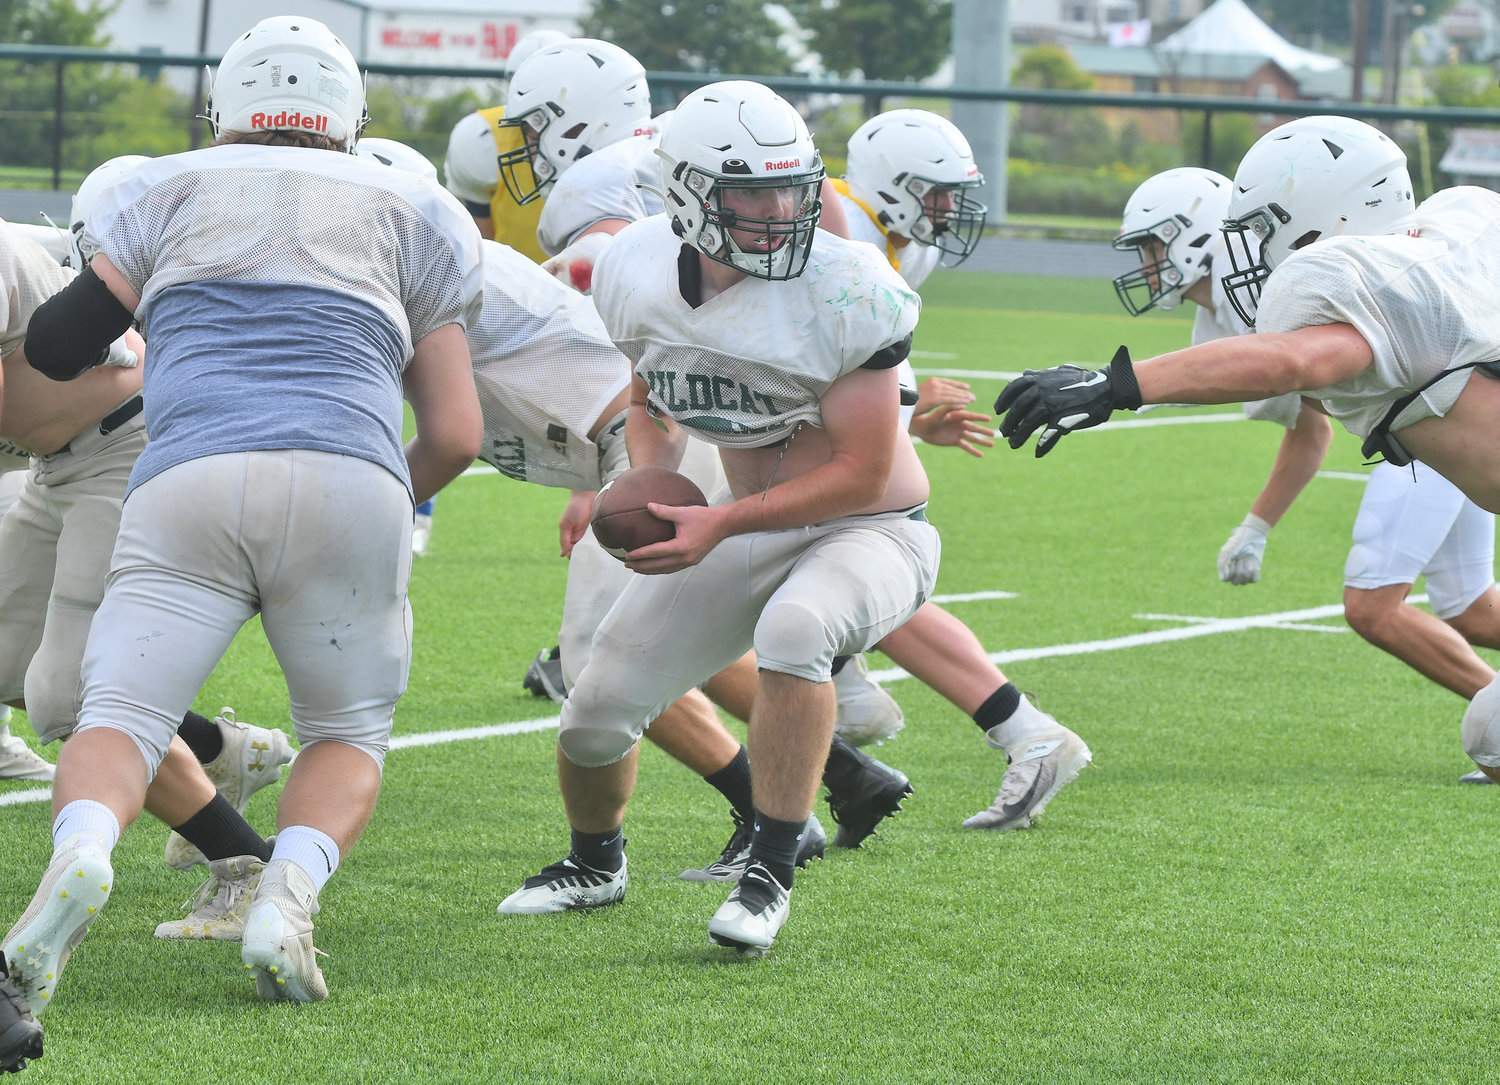 Adirondack quarterback Brett Sanford turns to hand the ball off to Colin White with offensive lineman Brandon Moore pulling for a block during at recent practice in Boonville. Sanford and White are top returners for the Wildcats.